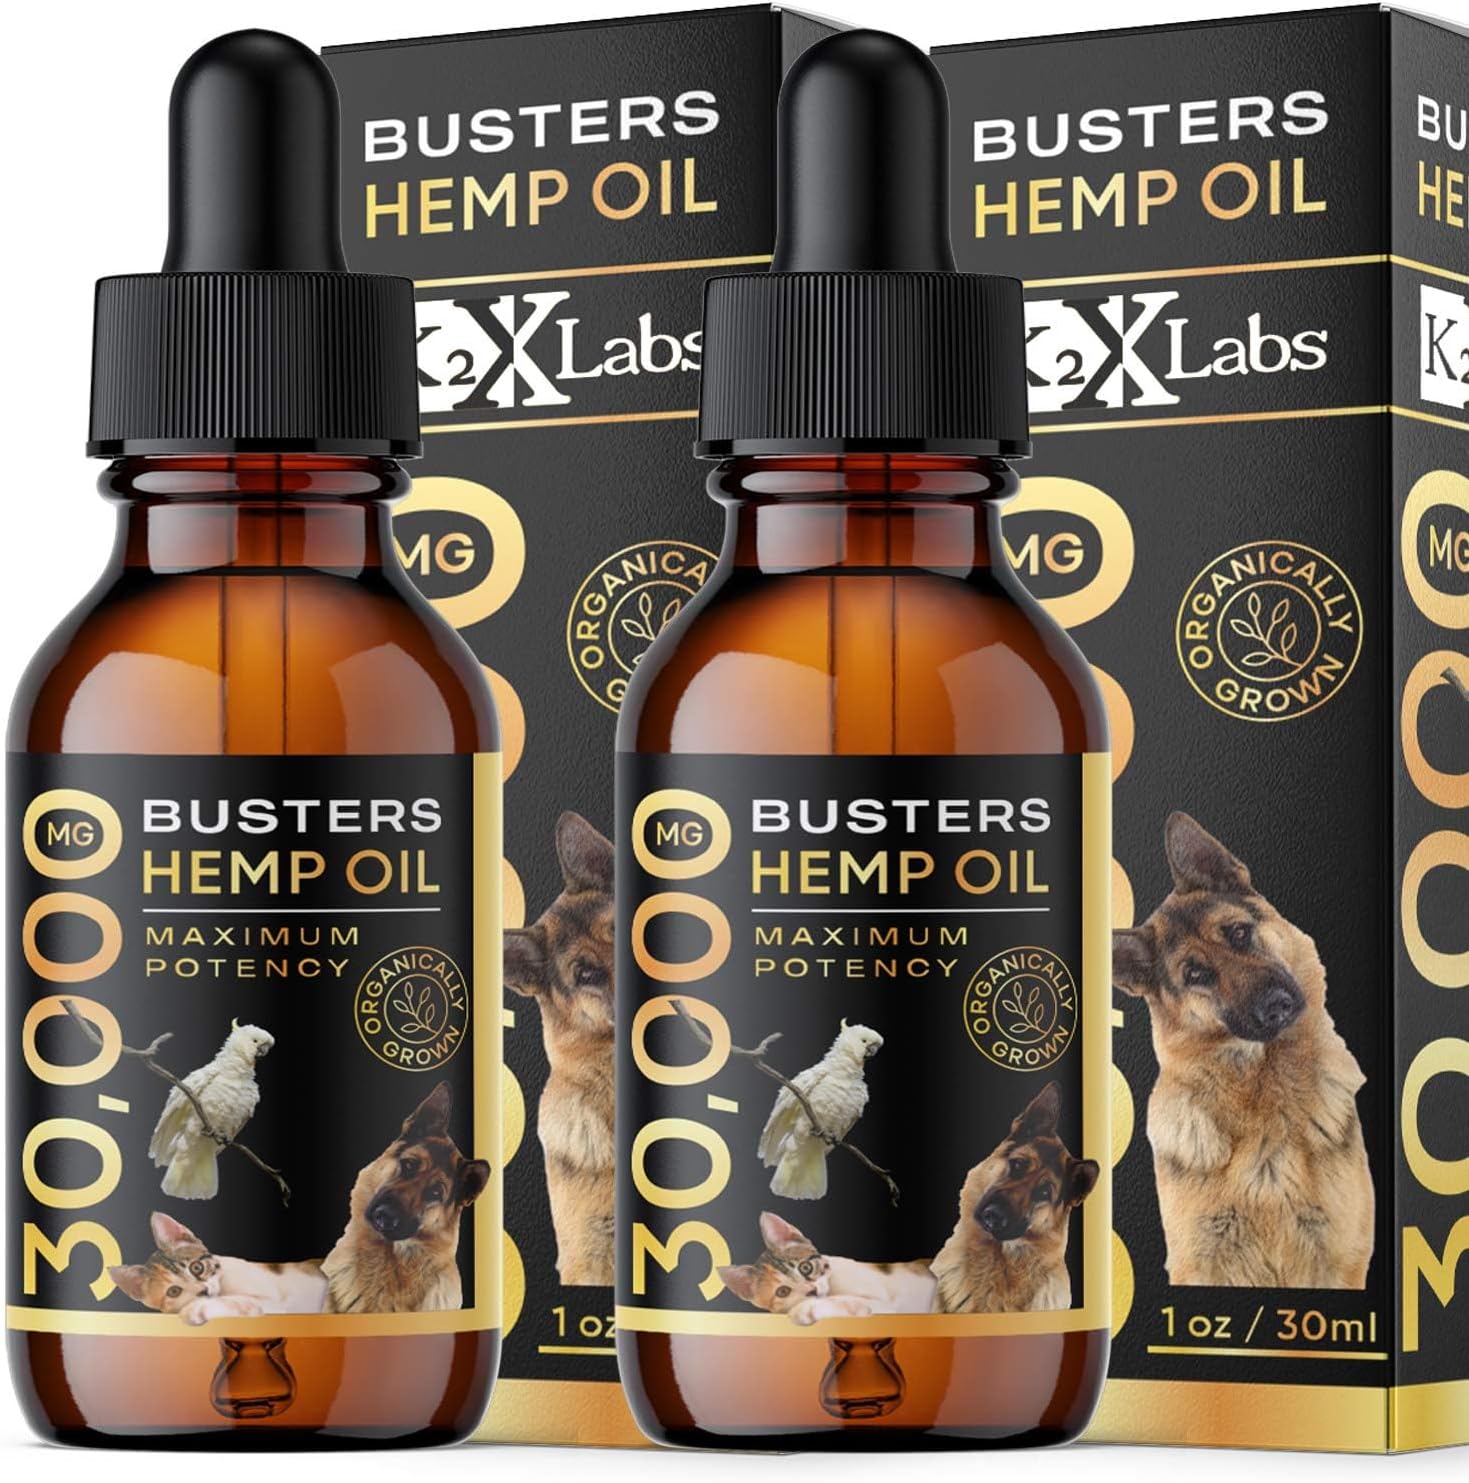 Busters Max Potency Organic Hemp Oil [2Pack, 2Months Supply] & Treats for Dogs & Cats - Perfect Ratio Omega 3 & 6 - Made in USA - Hip & Joint Health, Natural Relief, Calming